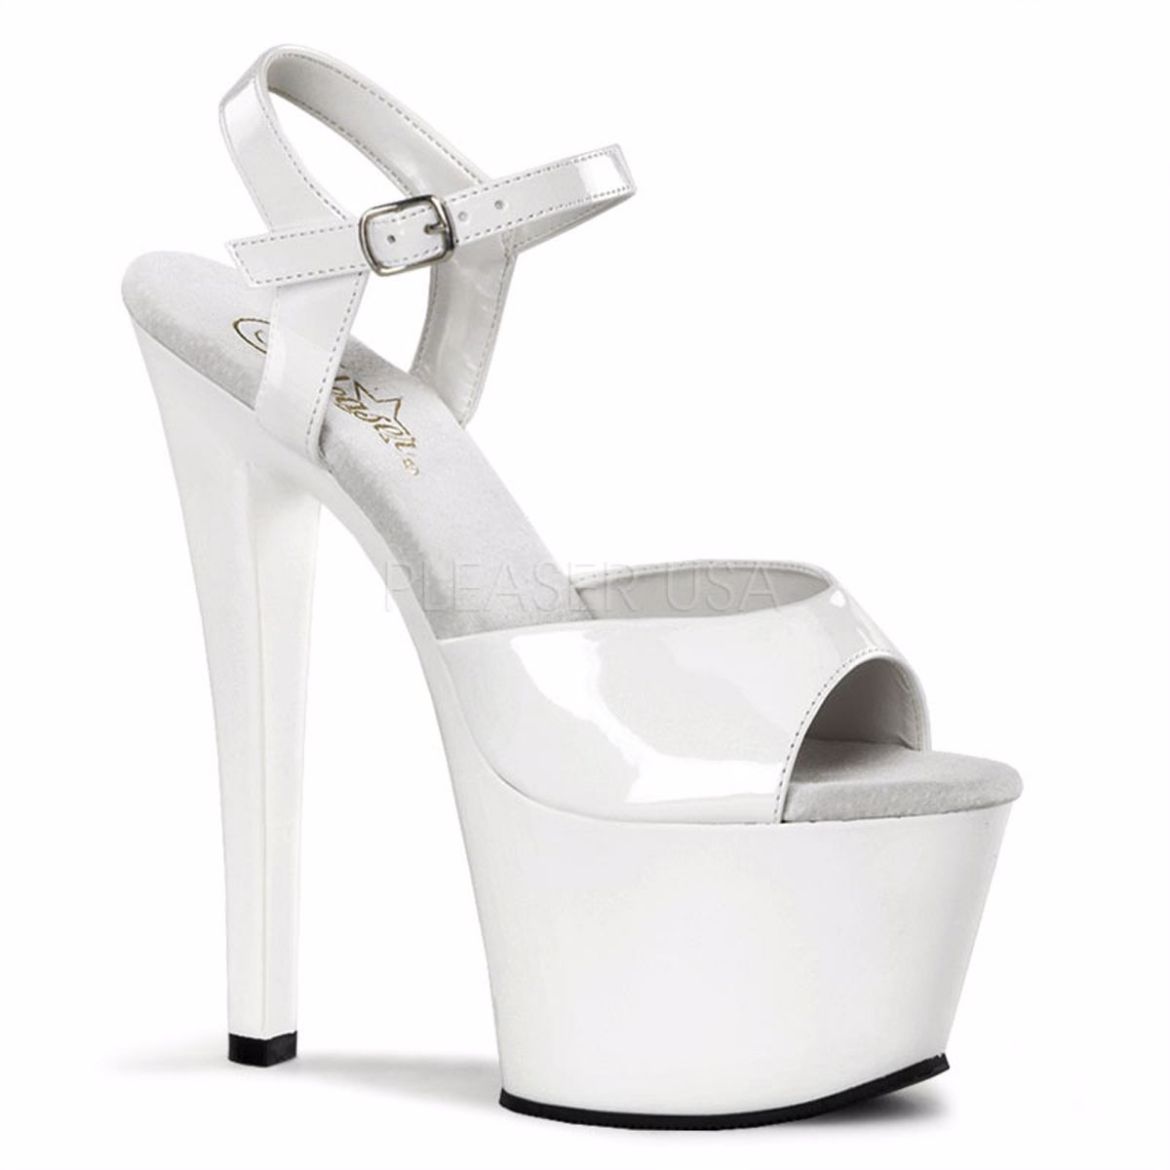 Product image of Pleaser Sky-309 White Patent/White, 7 inch (17.8 cm) Heel, 2 3/4 inch (7 cm) Platform Sandal Shoes